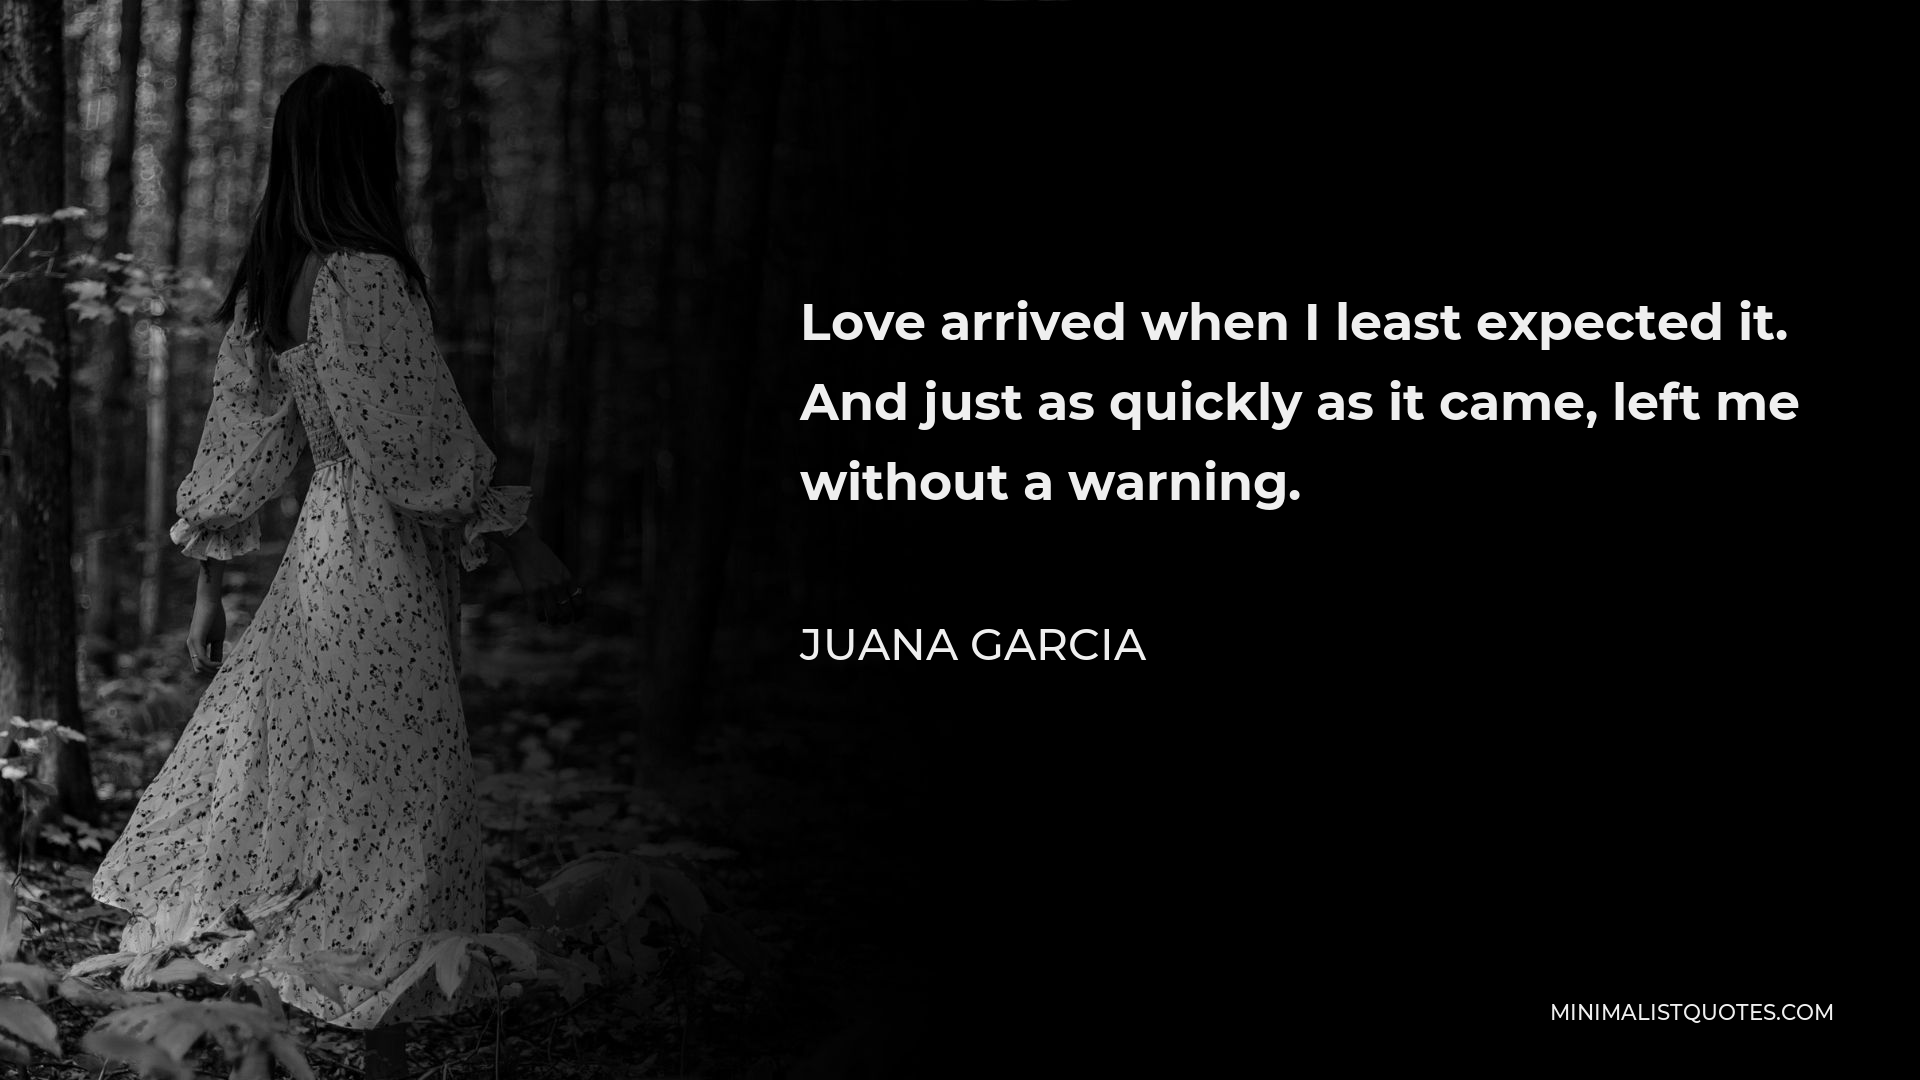 Juana Garcia Quote - Love arrived when I least expected it. And just as quickly as it came, left me without a warning.